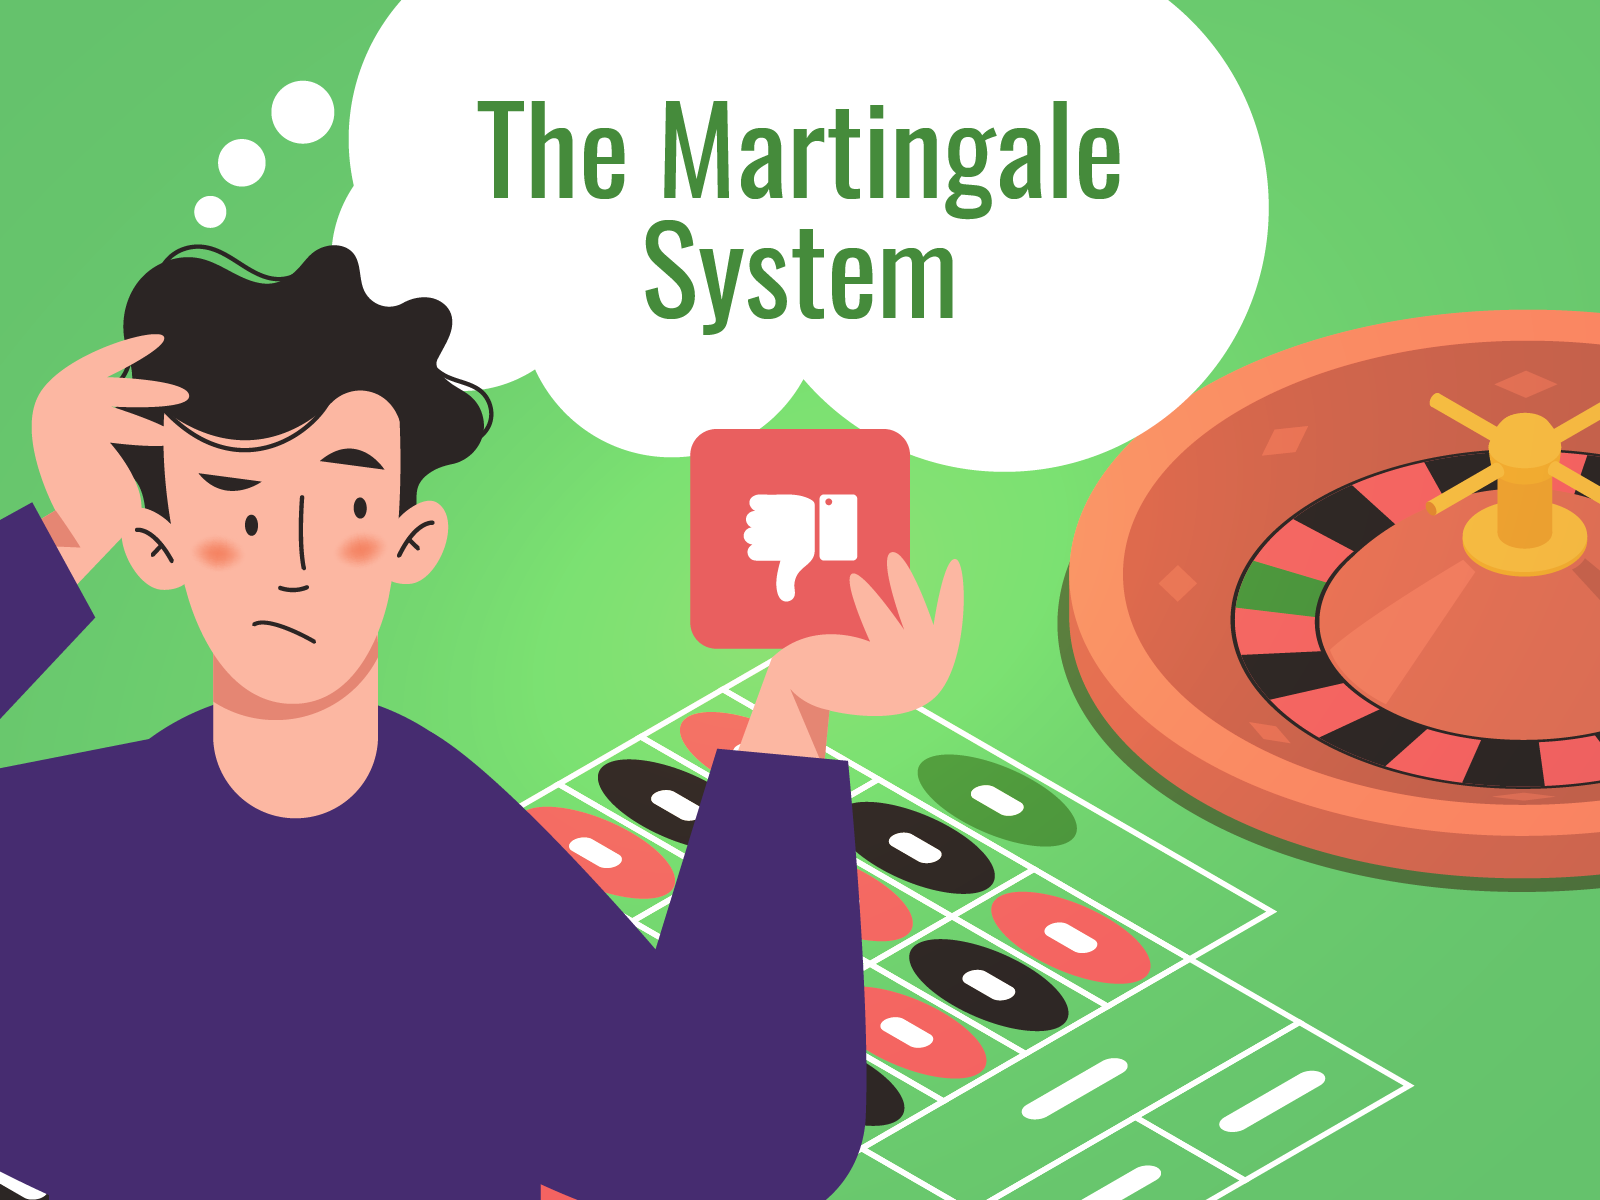 The Martingale System - Roulette